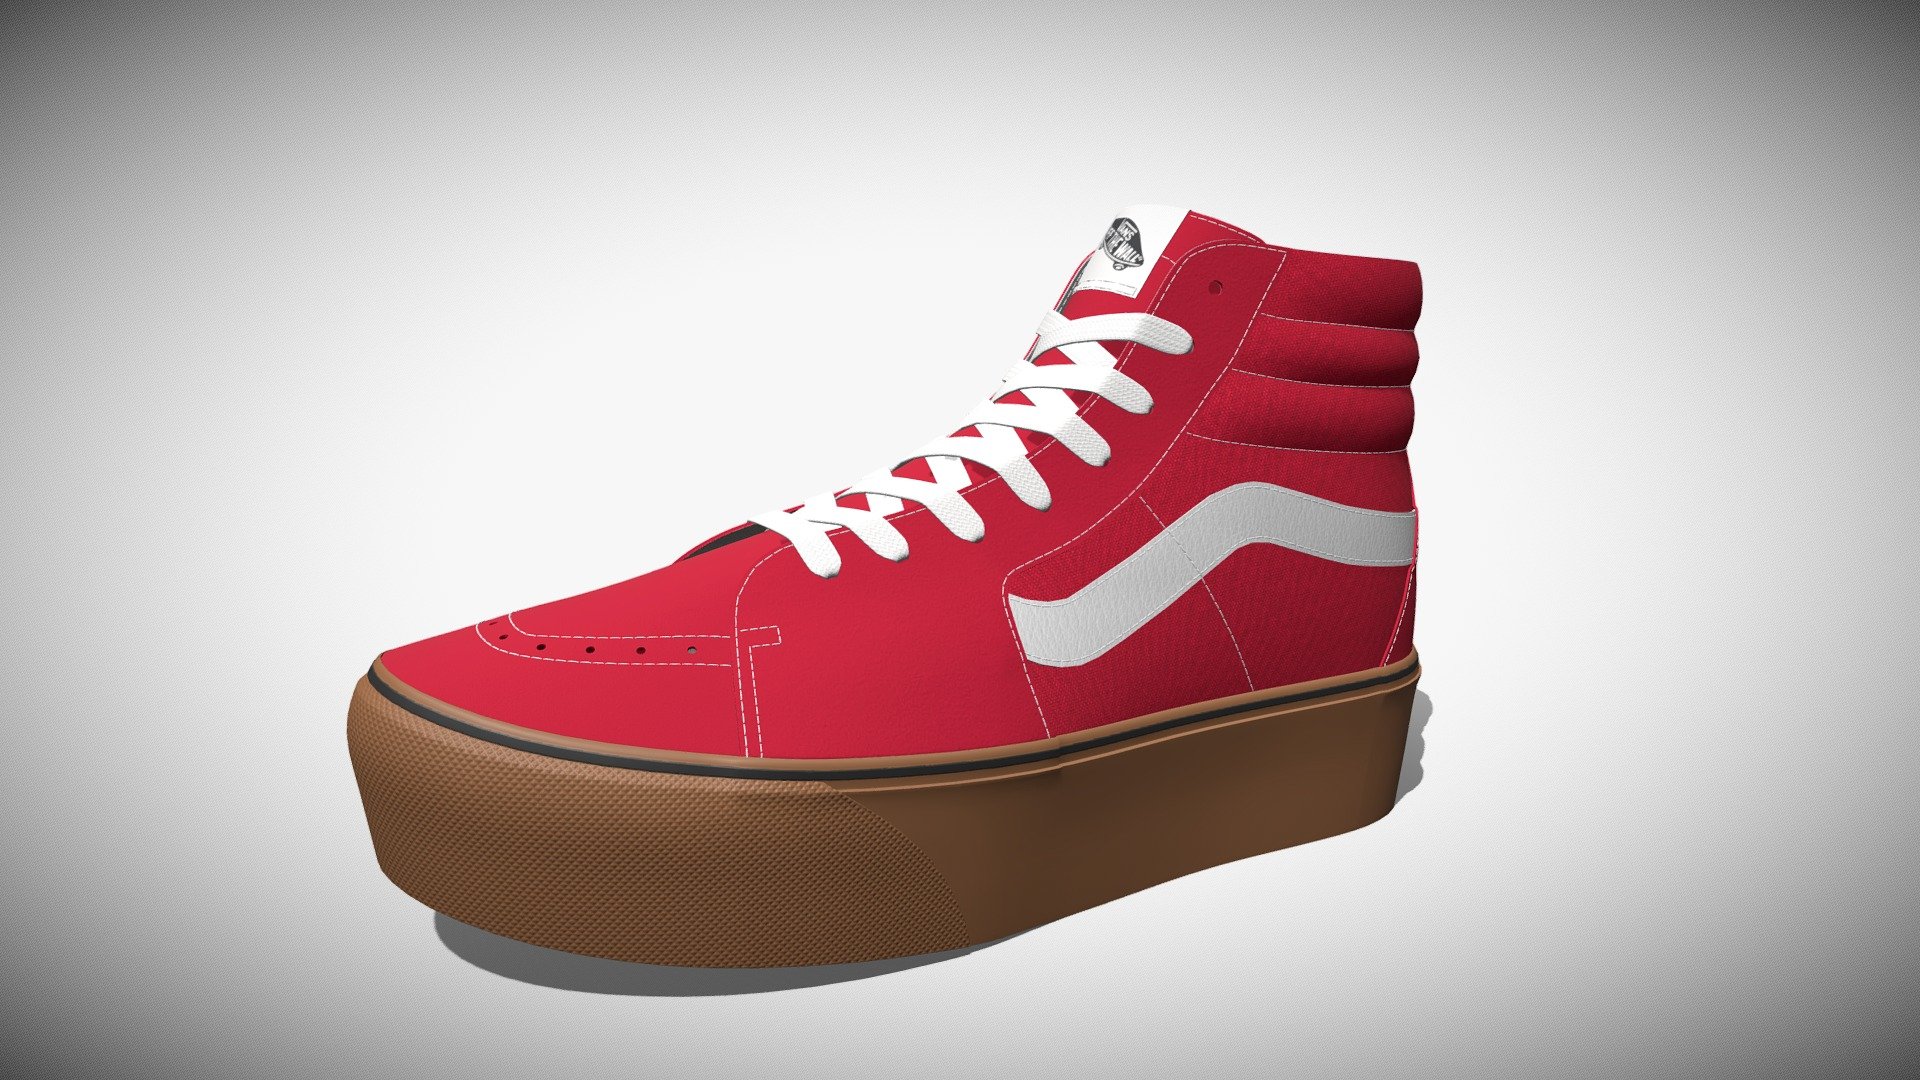 Detailed 3D model of a pair of red Vans Sk8-Hi Platform Gumsole sneakers, modeled in Cinema 4D. The model was created using approximate real world dimensions.

The model has 368,026 polys and 388,526 vertices.

An additional file has been provided containing the original Cinema 4D project file with both standard and v-ray materials, textures and other 3d format such as 3ds, fbx and obj. These files contain both the left and right pair of the shoes 3d model